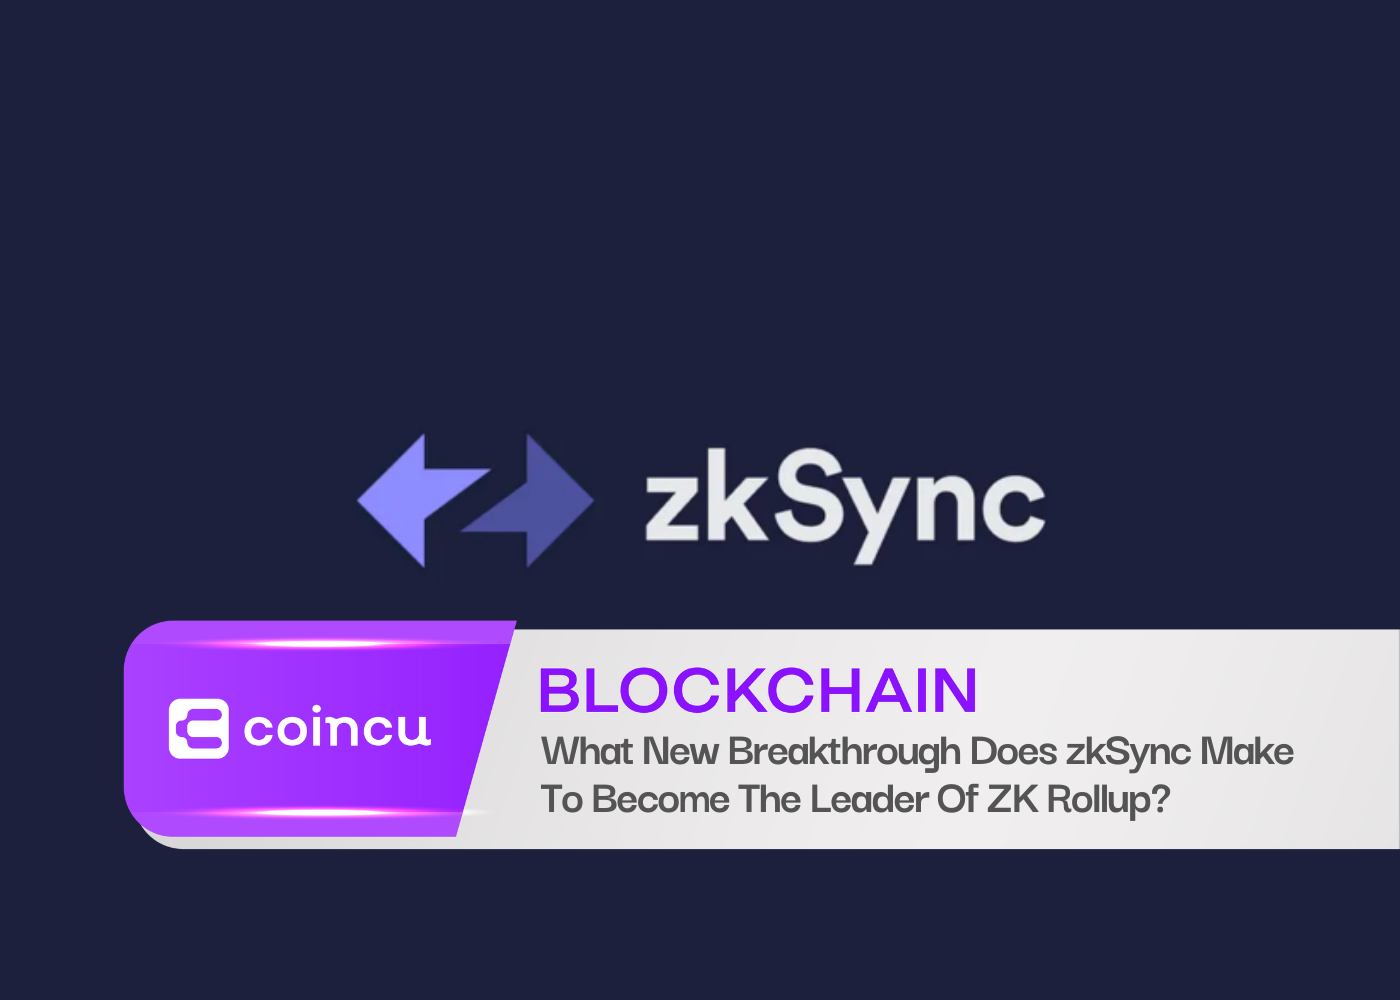 What New Breakthrough Does zkSync Make To Become The Leader Of ZK Rollup?